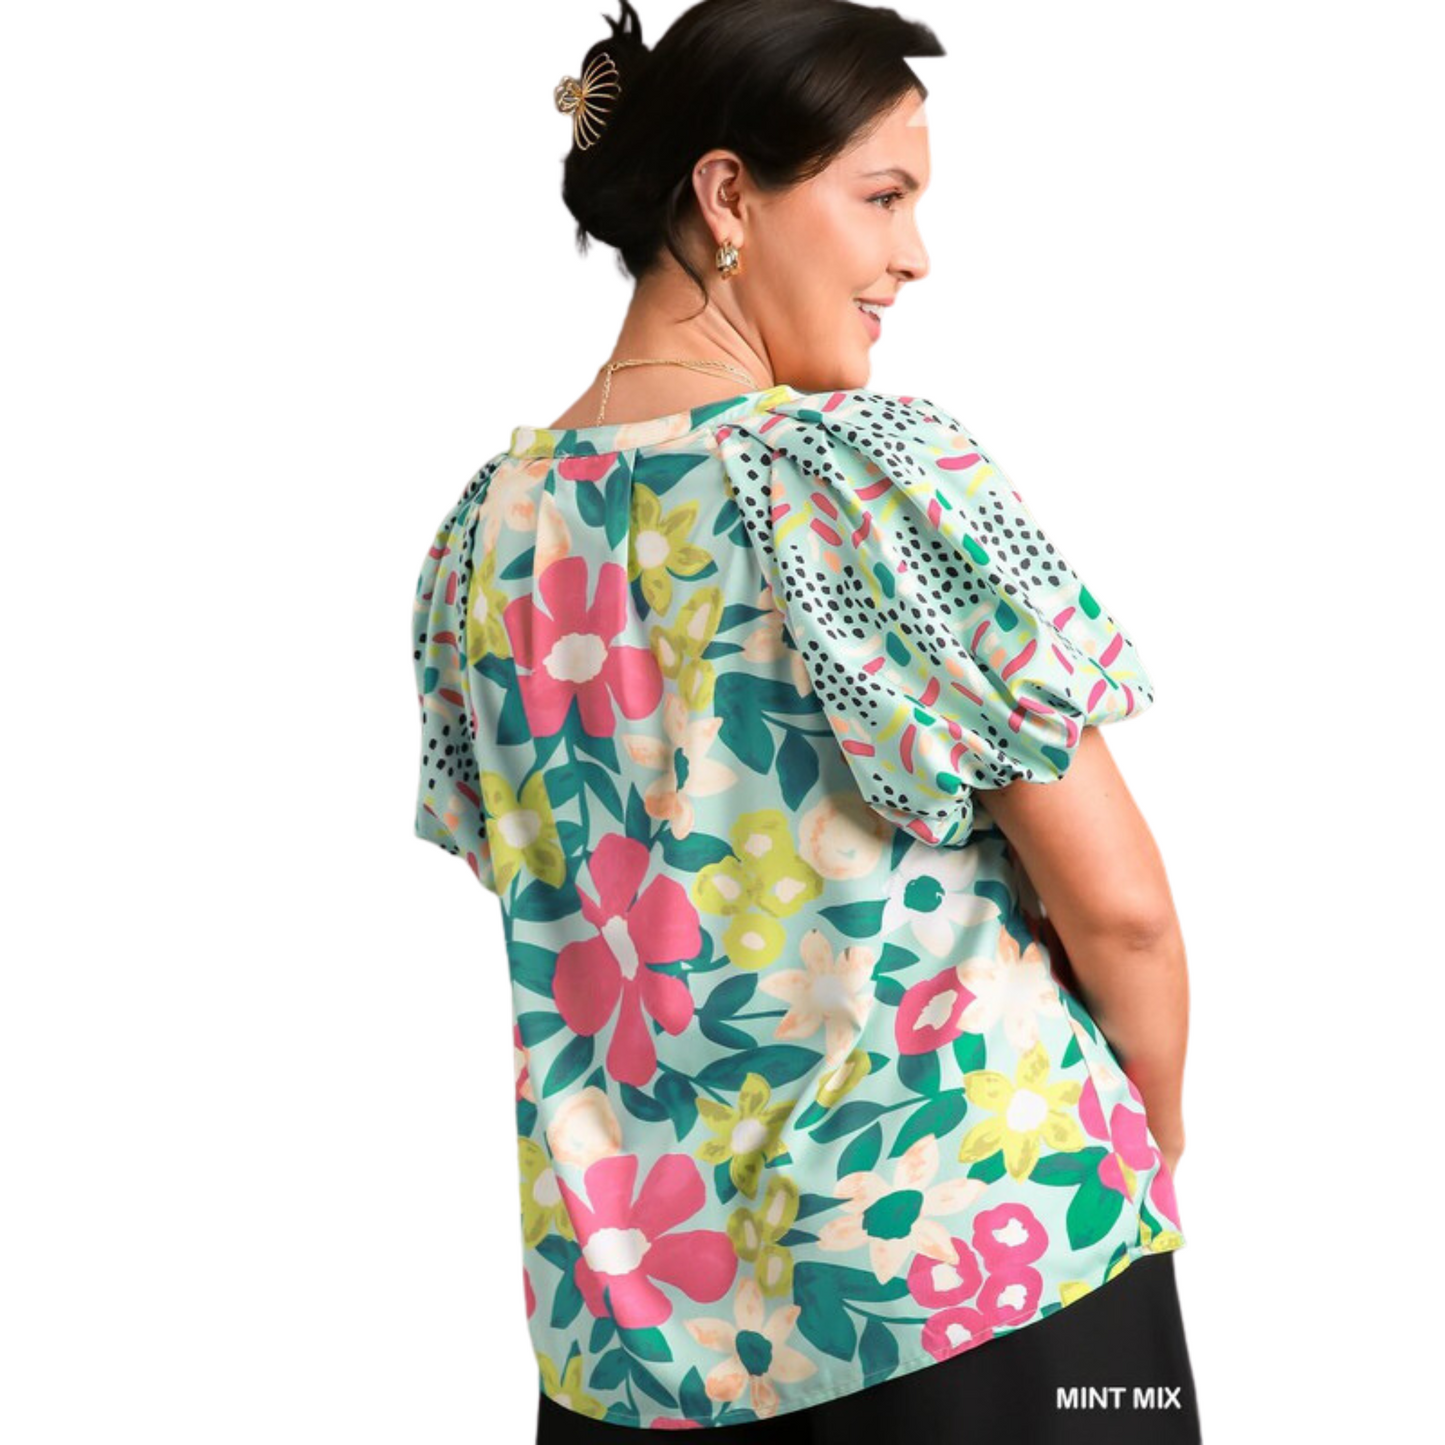 This Mixed Media Bubble Sleeve Top features a mint mix floral print and short sleeves for a flirty and whimsical look. Perfect for spring, its soft and lightweight fabric will keep you feeling comfortable all day.